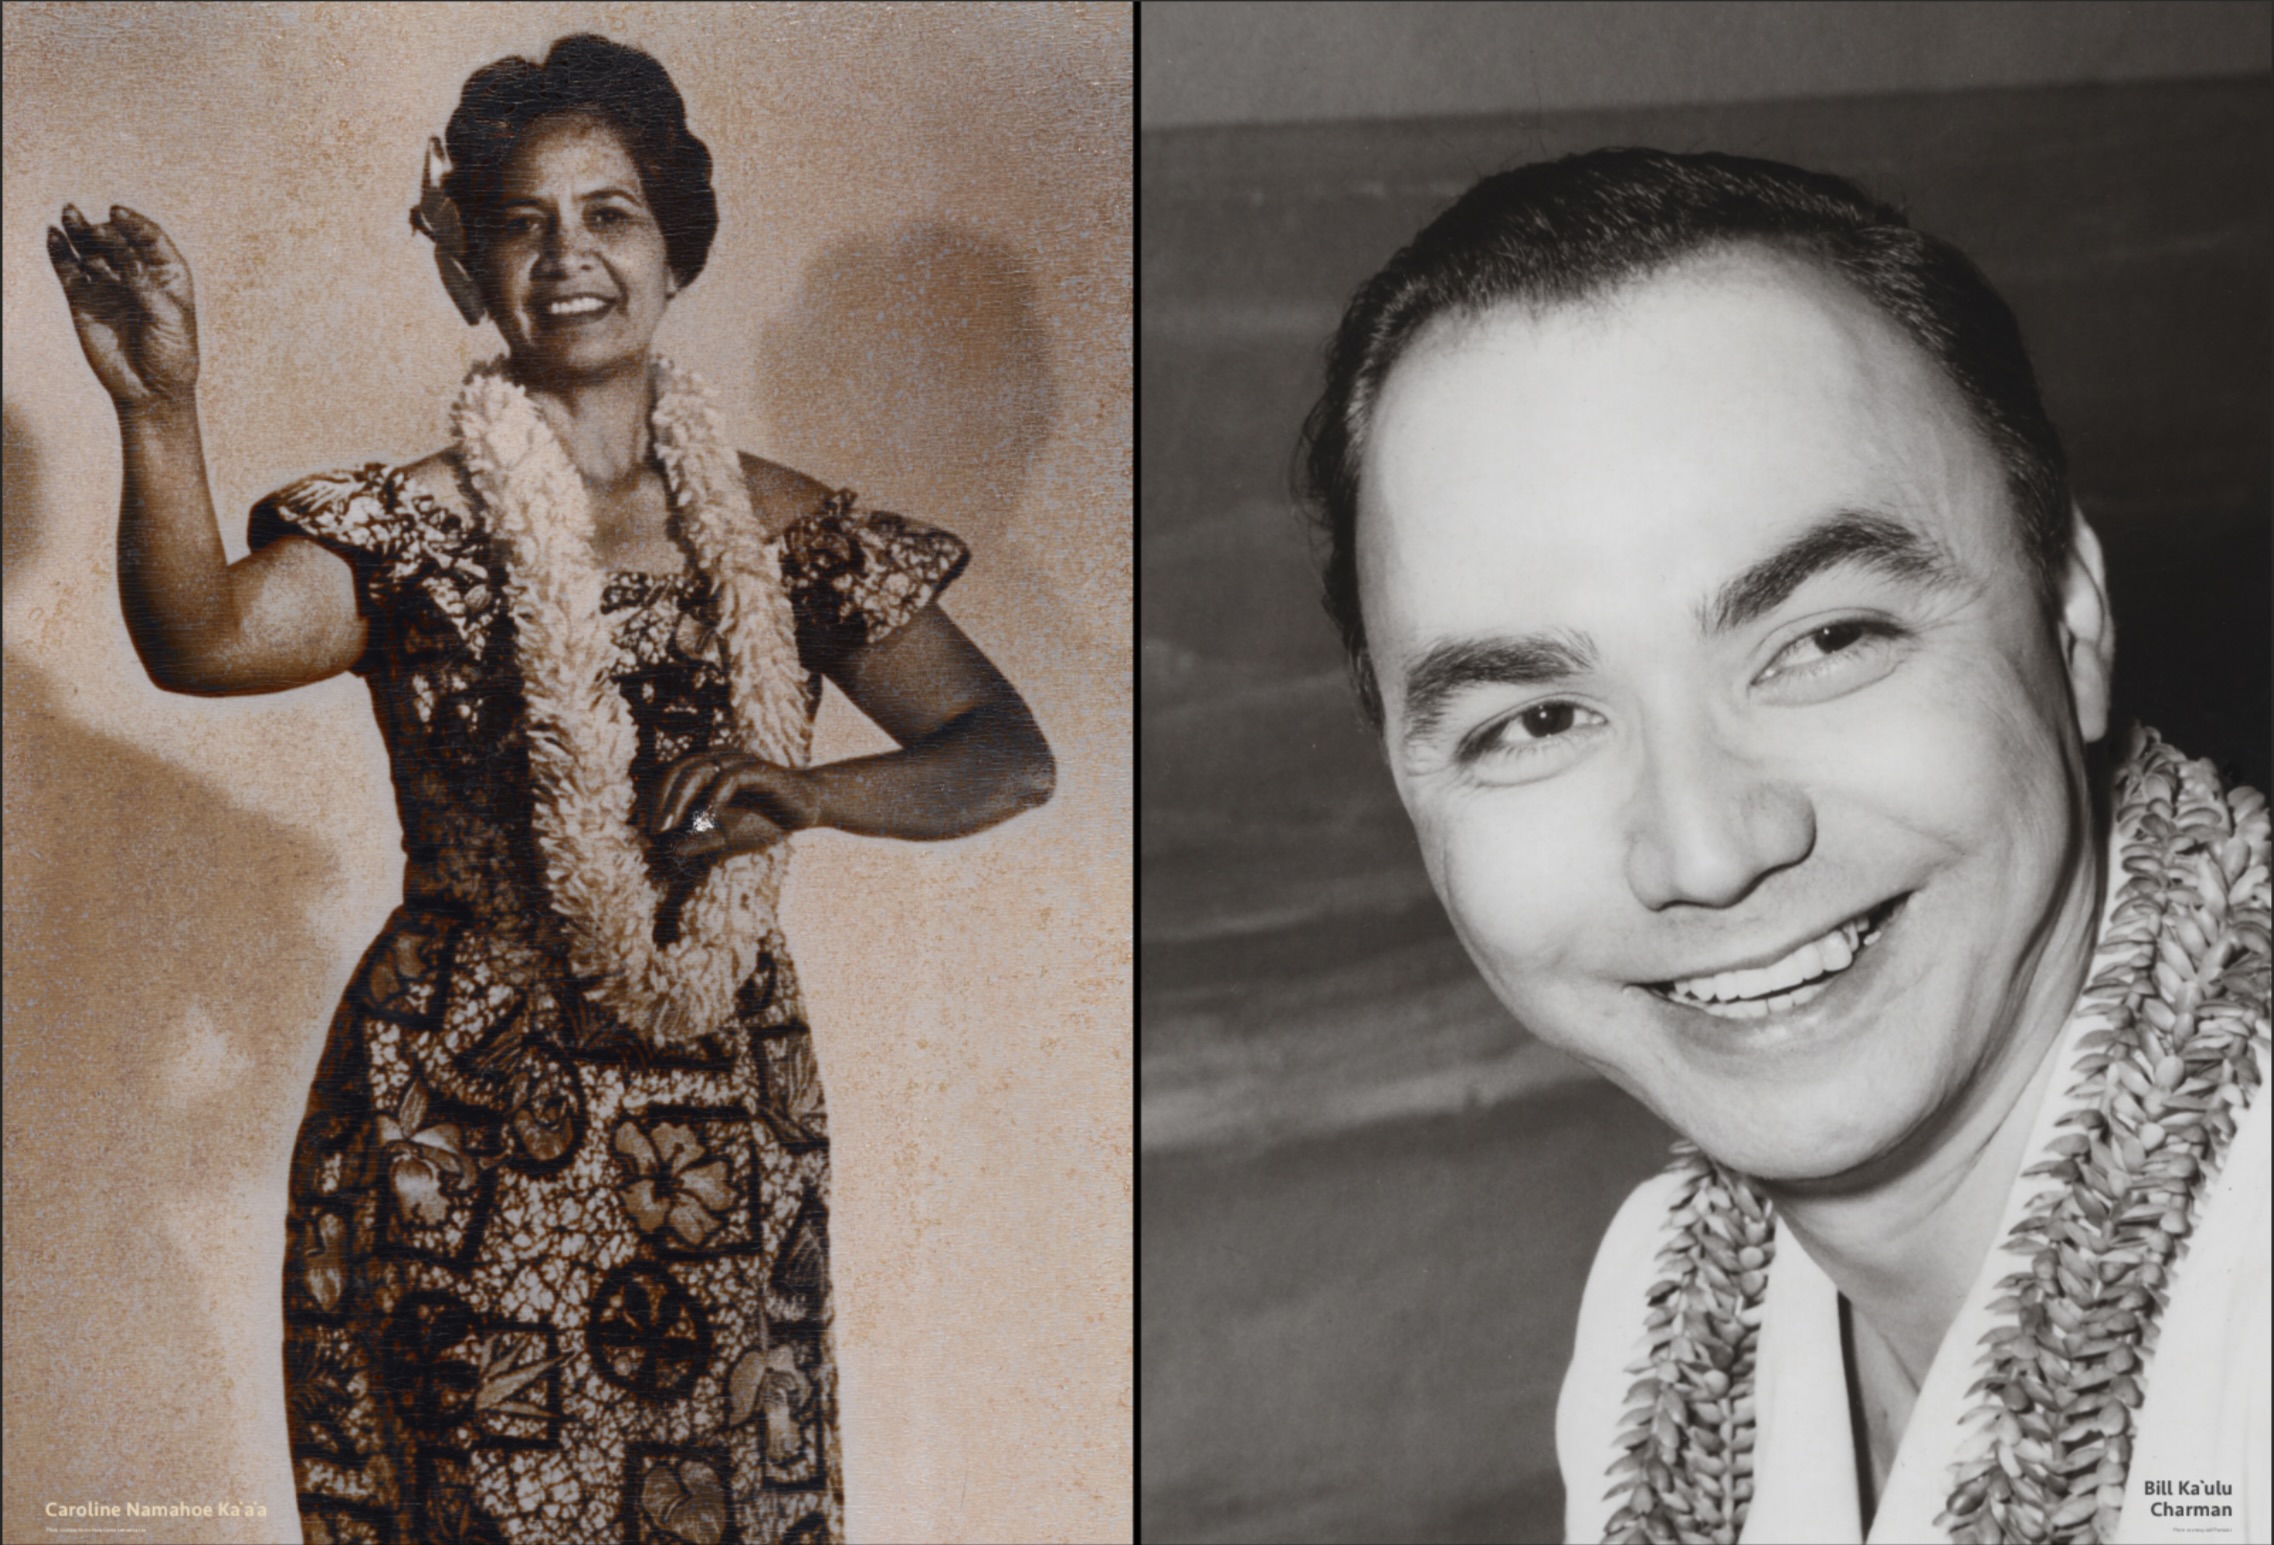 right, a woman gestures with her hands, wearing a flower lei and patterned dress; left, a man smiling.